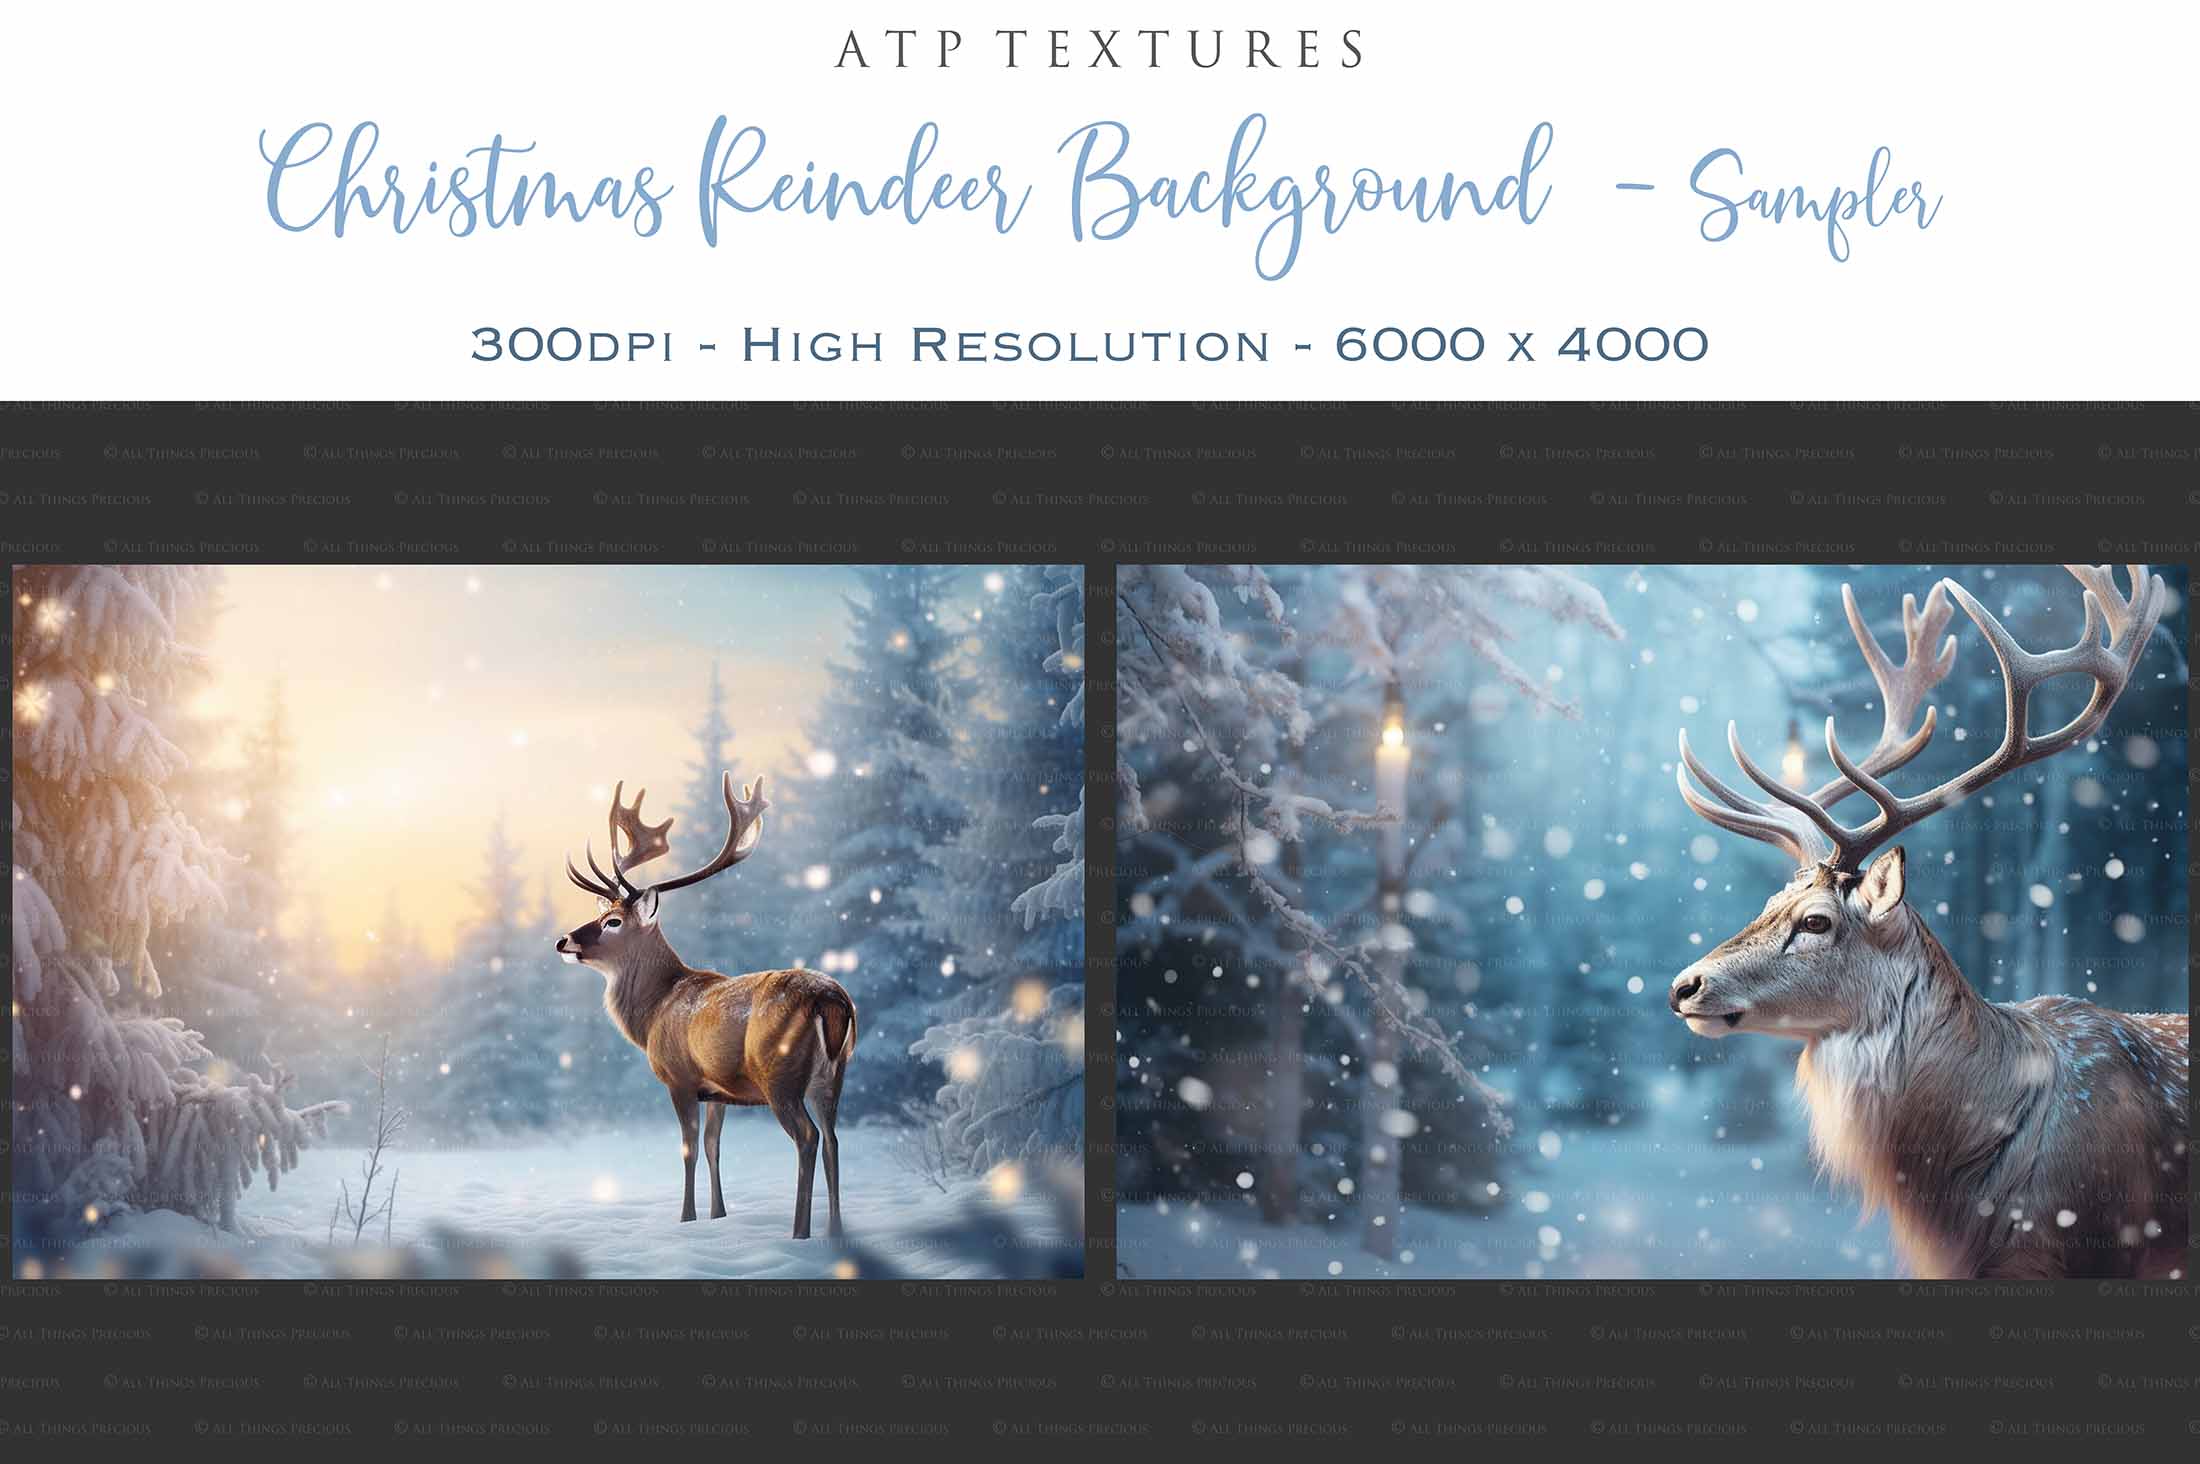 AI digital art for Scrapbooking, Photographers, Artists and Creatives.24 Jpeg Reindeer backgrounds.Each file is 300dpi. All are 4000x6000.They are in Jpeg format and high resolution.The files average between 7MB to 11MB each.You can print them as a backdrop, use as digital paper or a background for your photography.